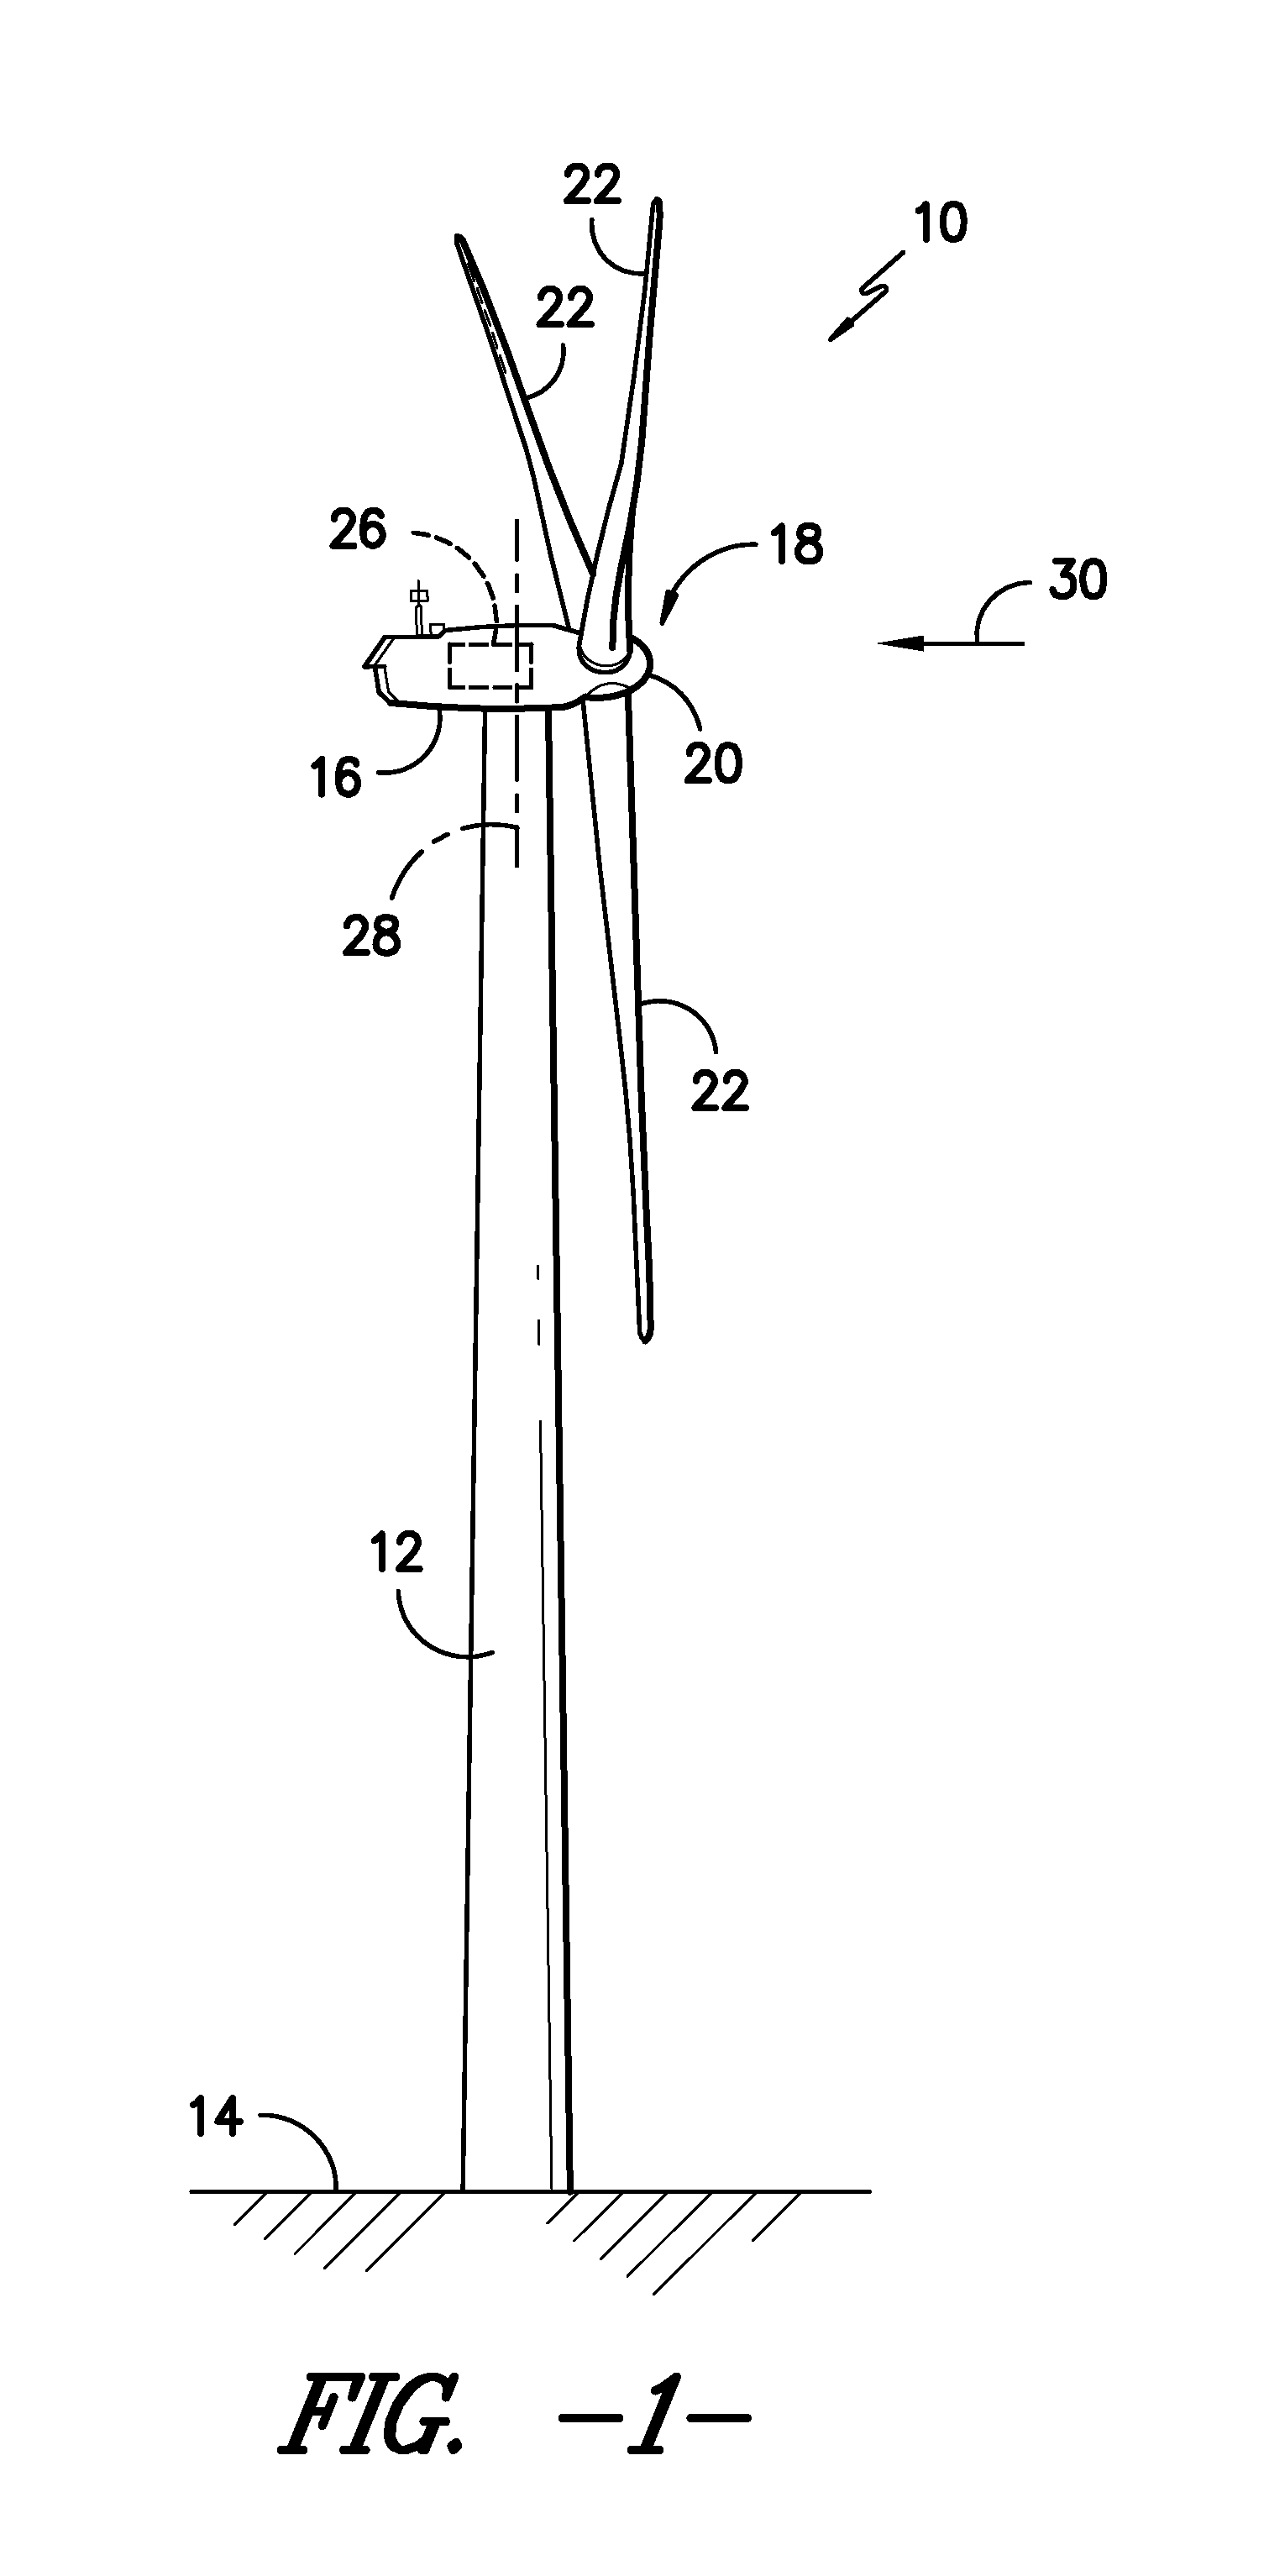 System for actively monitoring wear on wind turbine brake pads and related methods